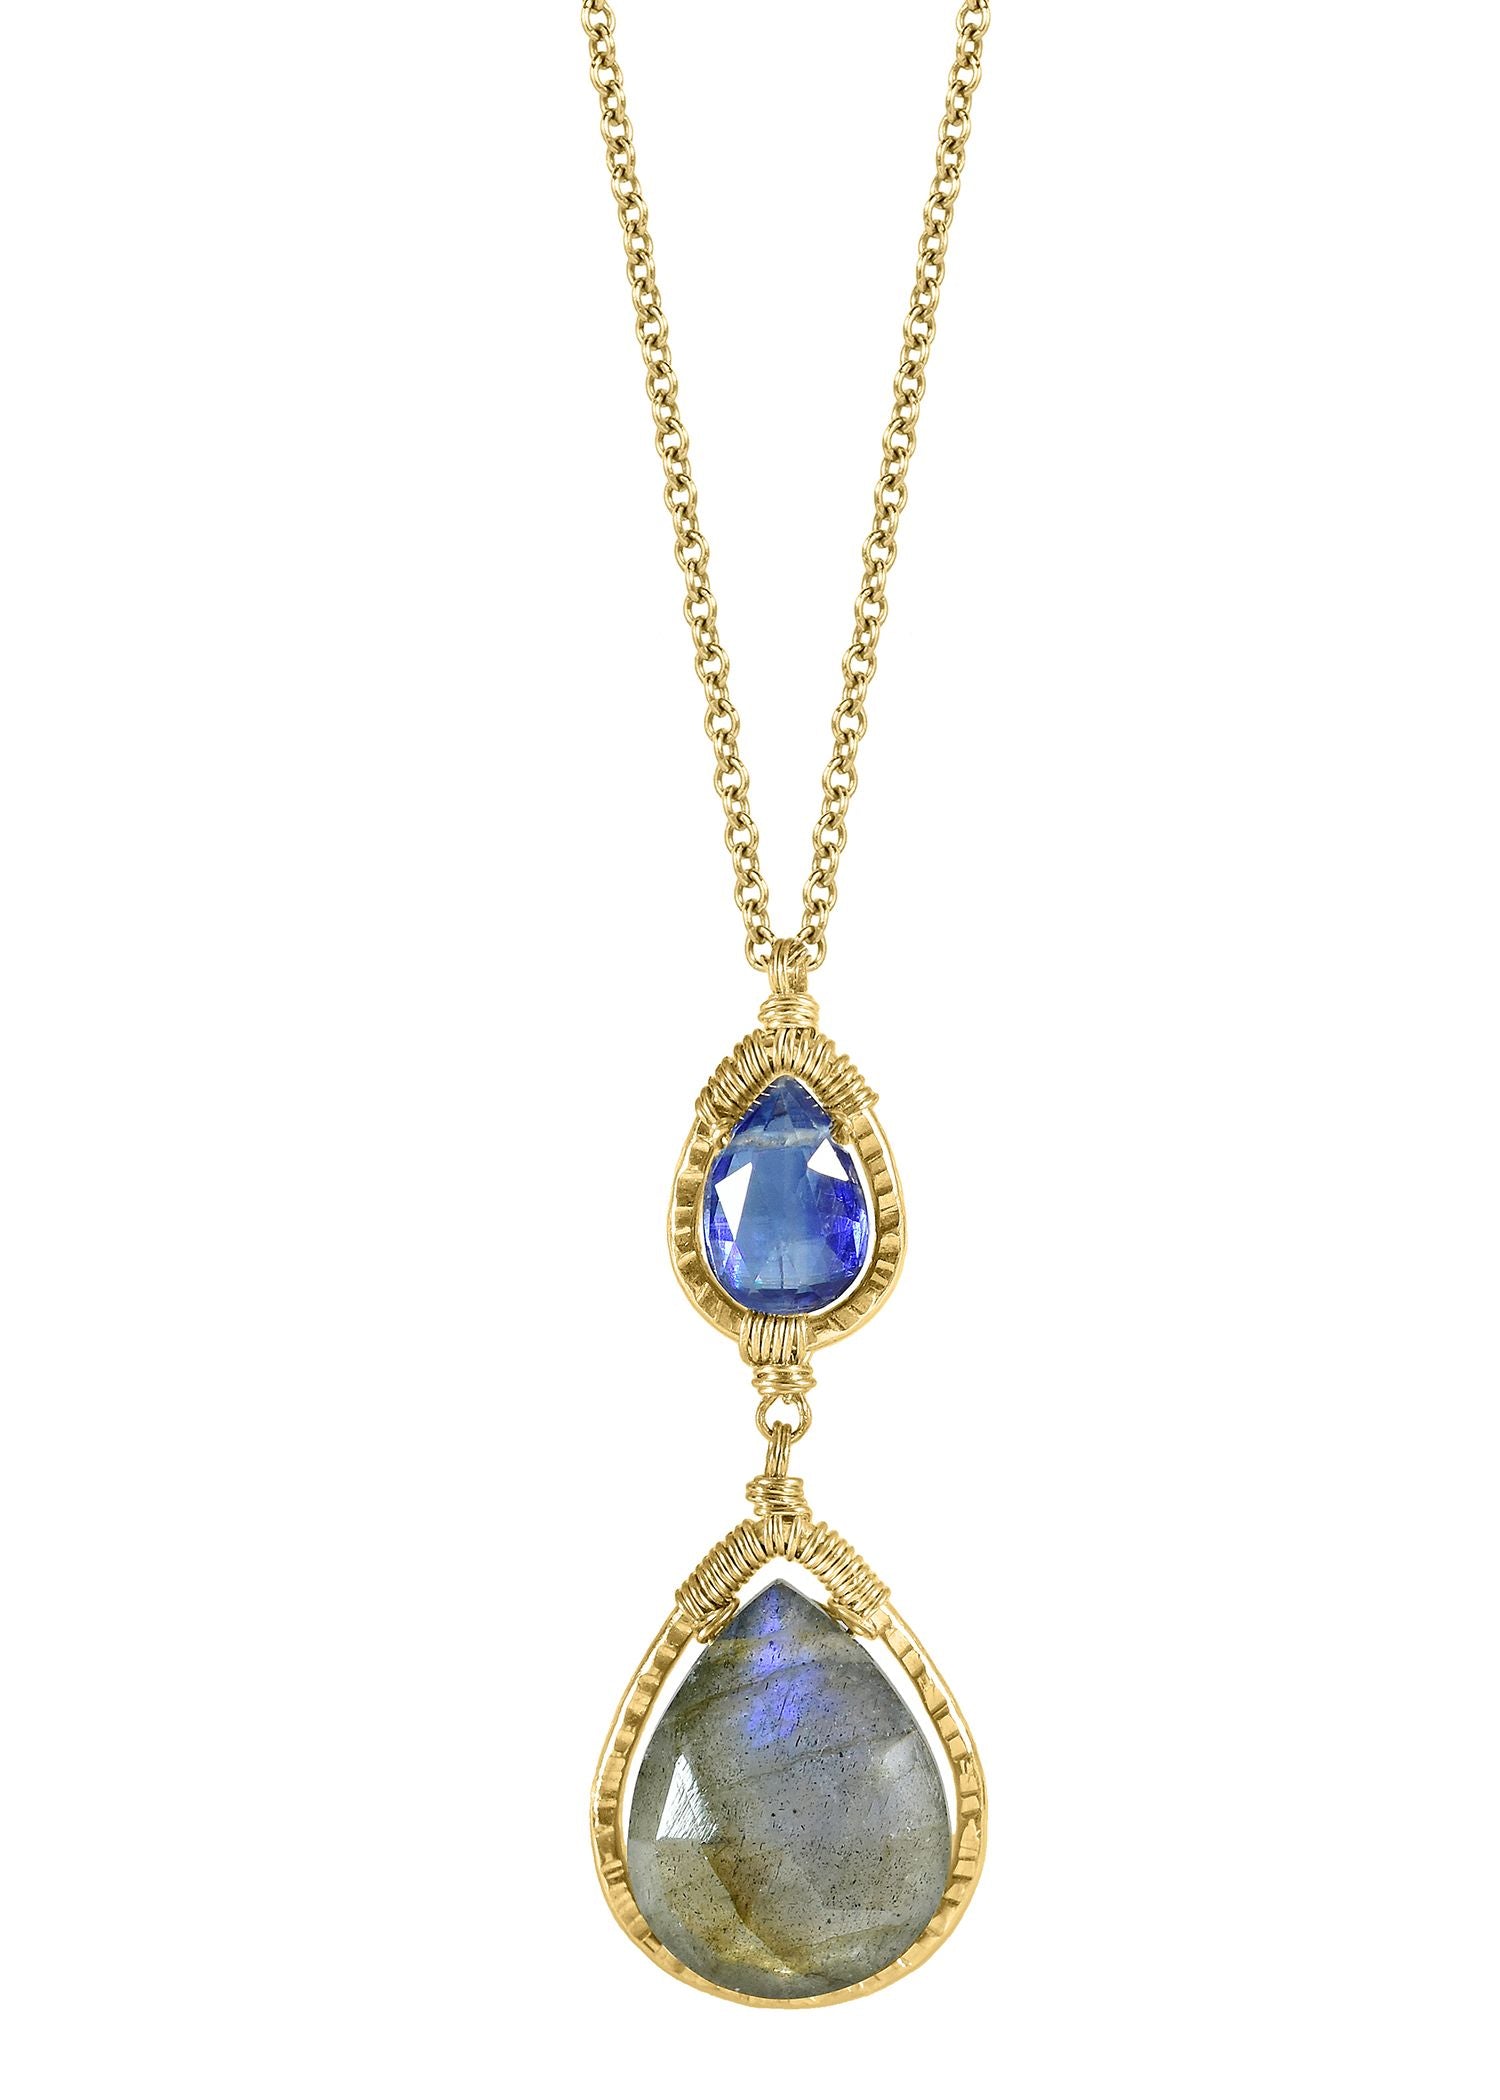 Labradorite Kyanite 14k gold fill Necklace measures 17-1/8" in length Pendant measures 1-1/4" in length and 1/2" in width Handmade in our Los Angeles studio